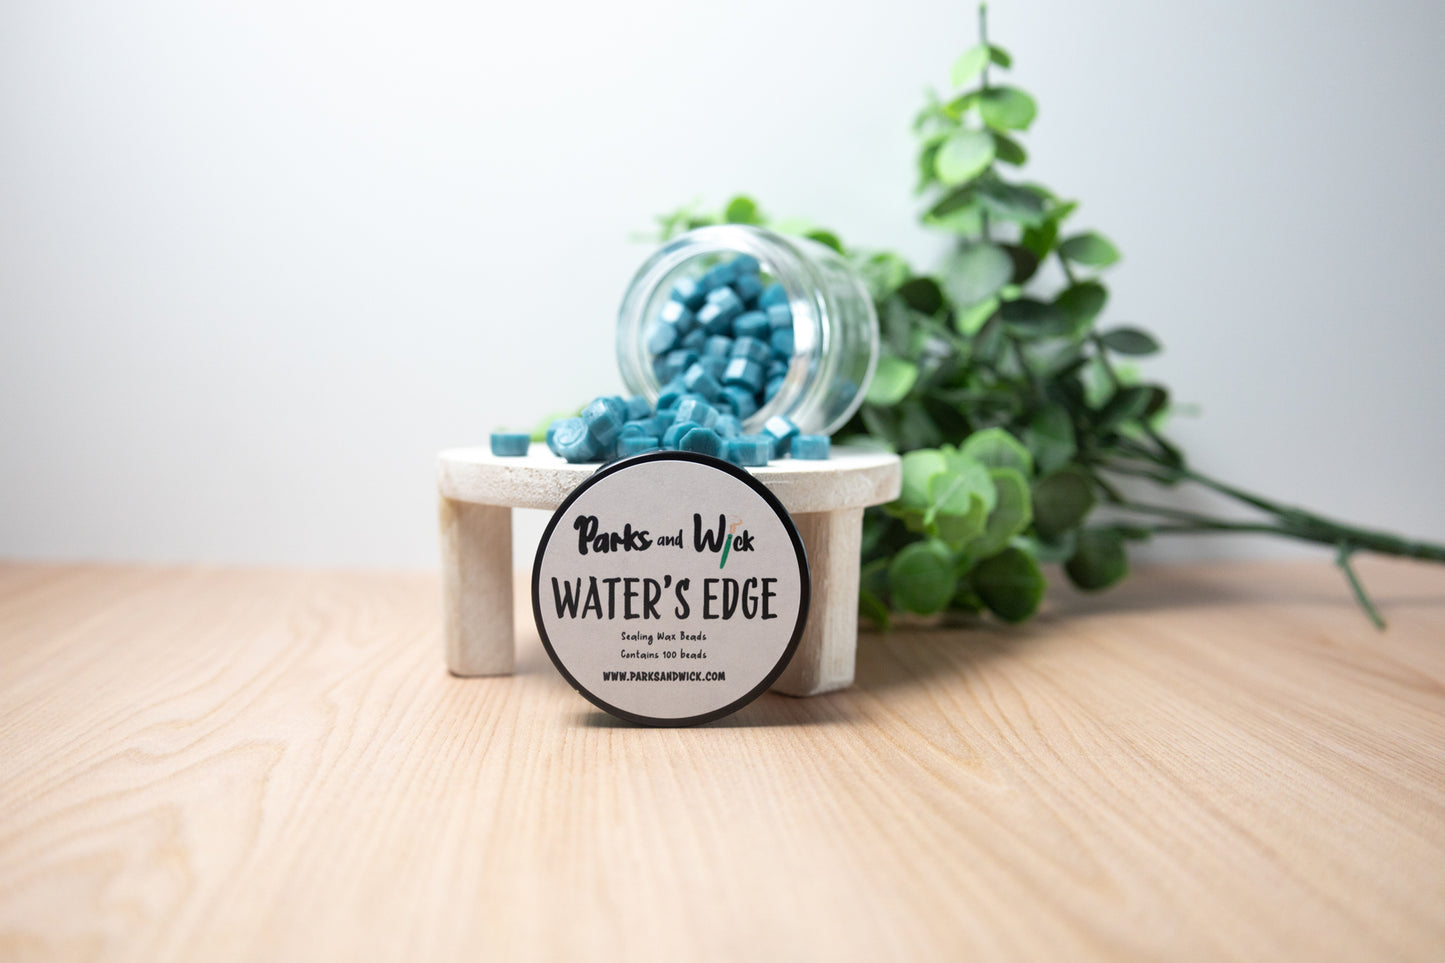 Water's Edge Wax Seal Beads | Wax Seal Beads | Parks and Wick